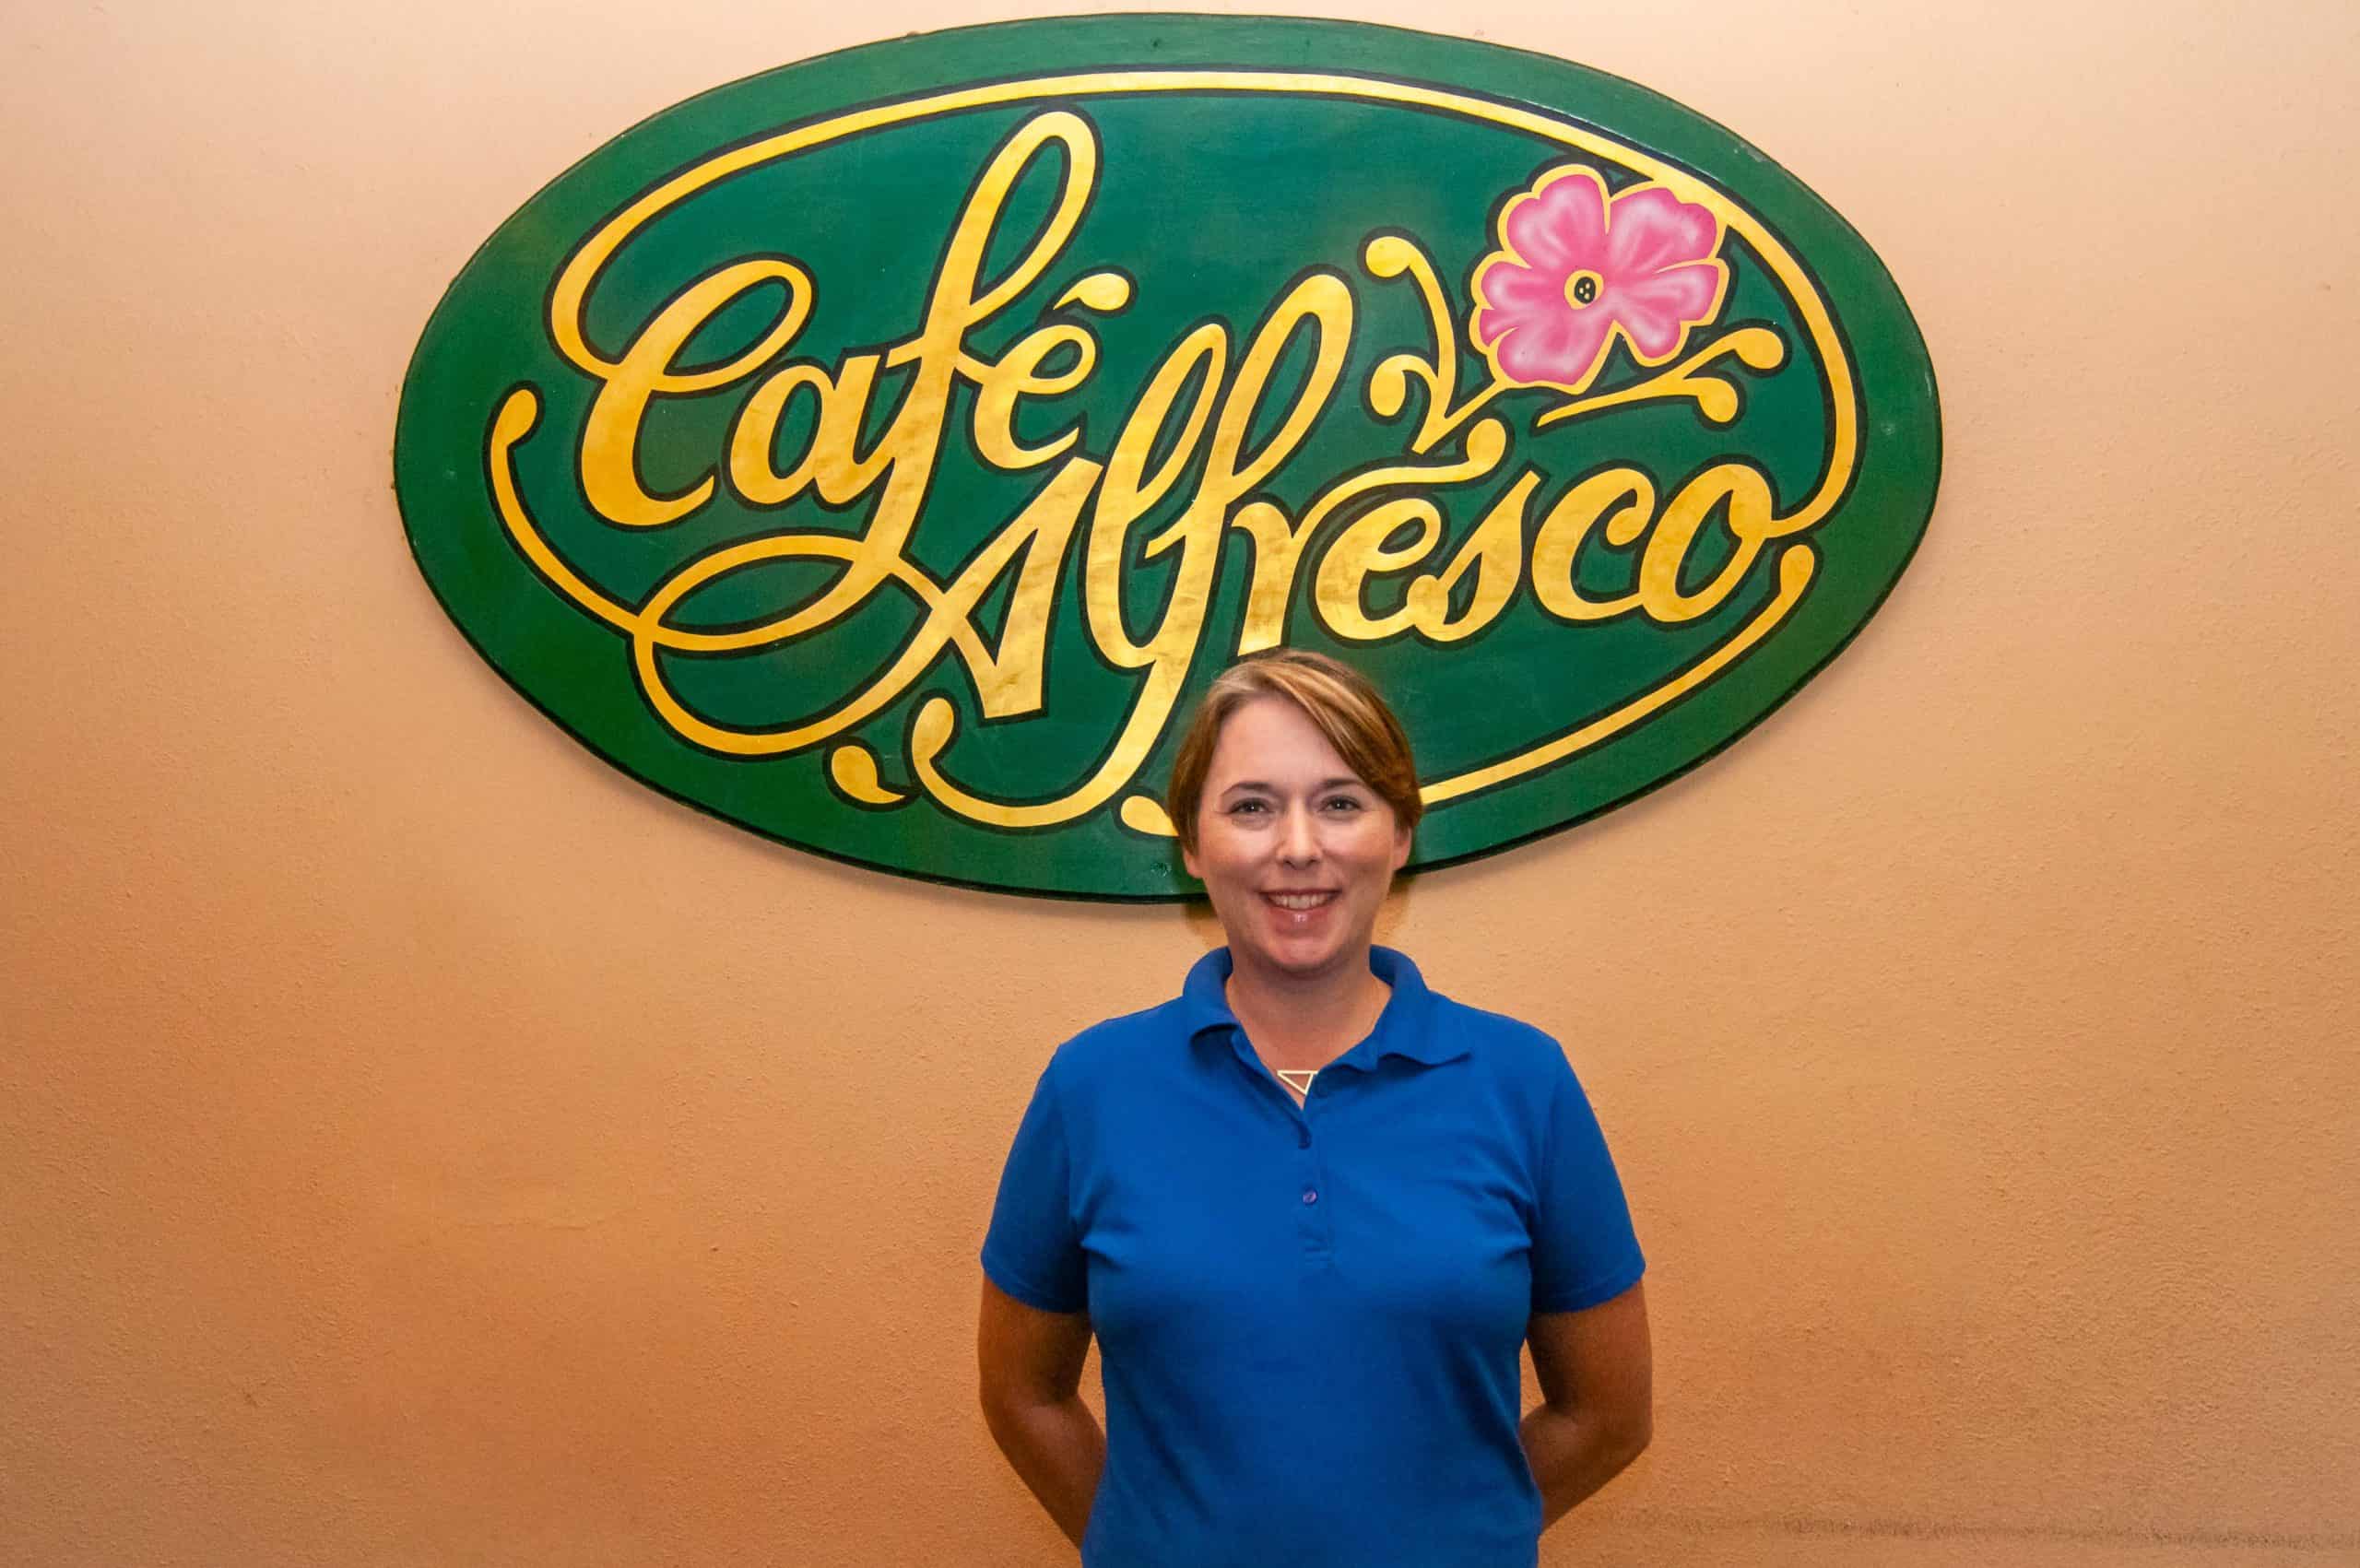 Ann standing in front of the Cafe Alfresco sign.